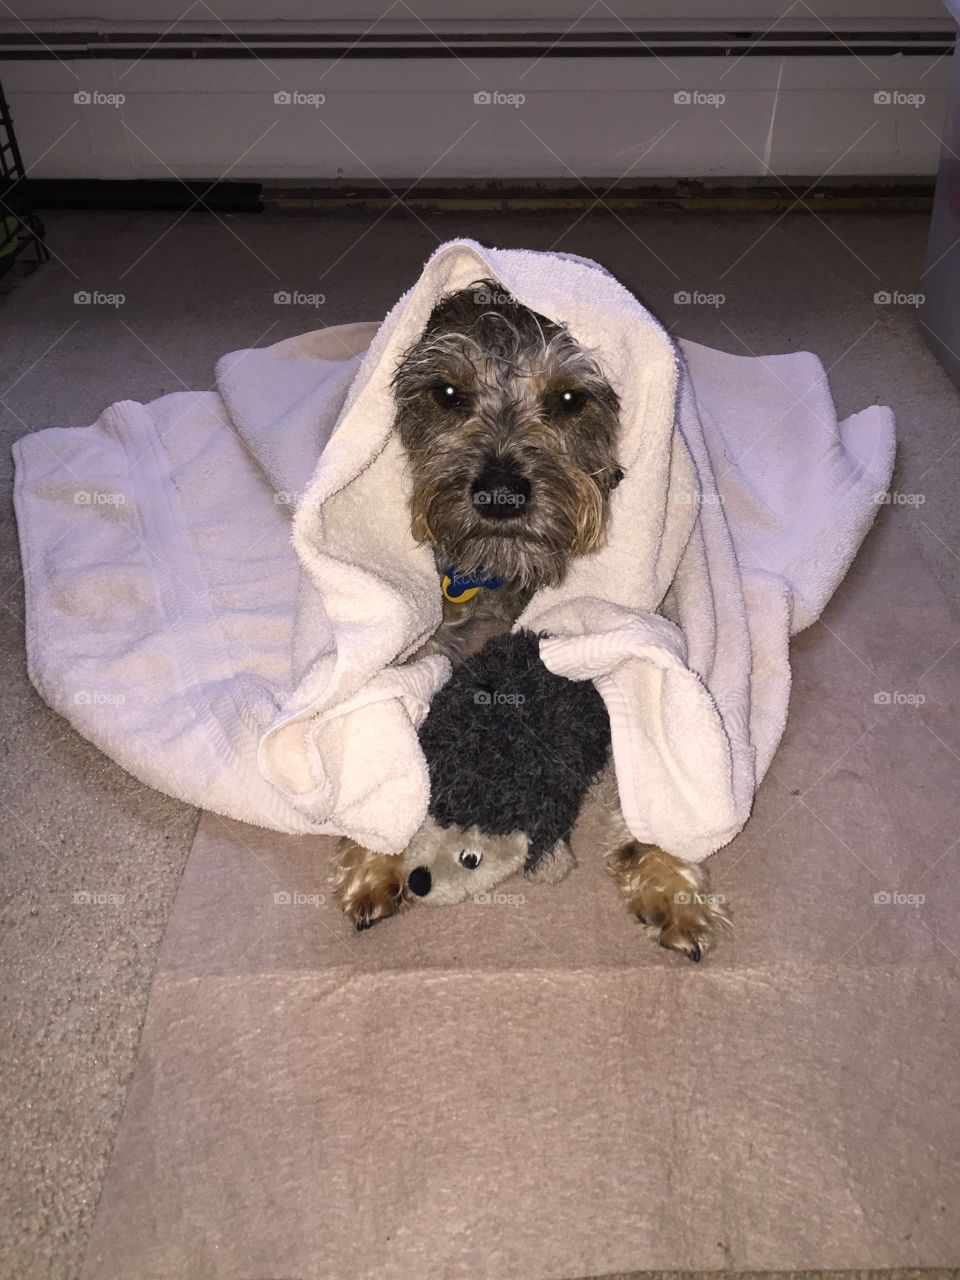 Wrapped in a towel, snuggling with my toy, drying off after my bath